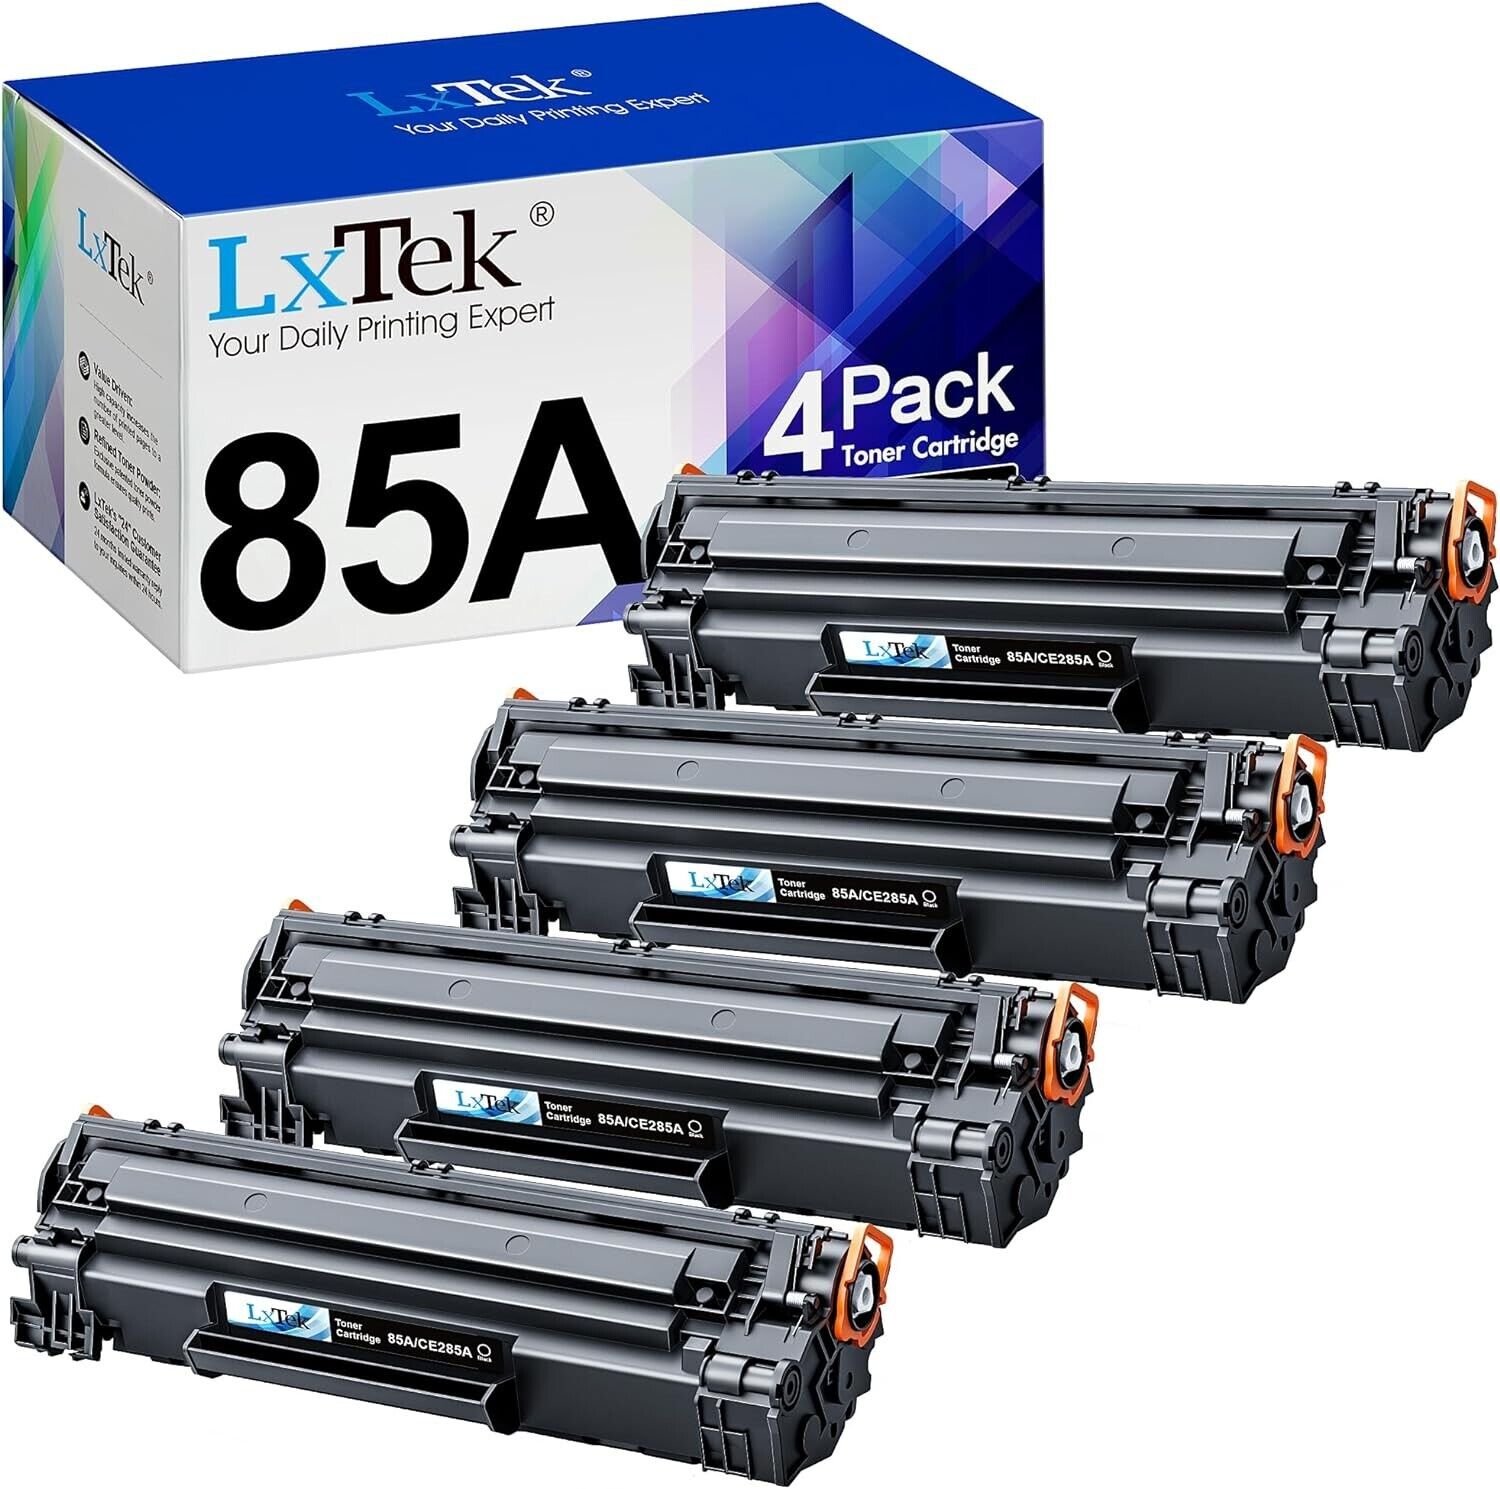 LxTek Compatible Toner Cartridge Replacement for HP 85A CE285A to use w/Laserjet